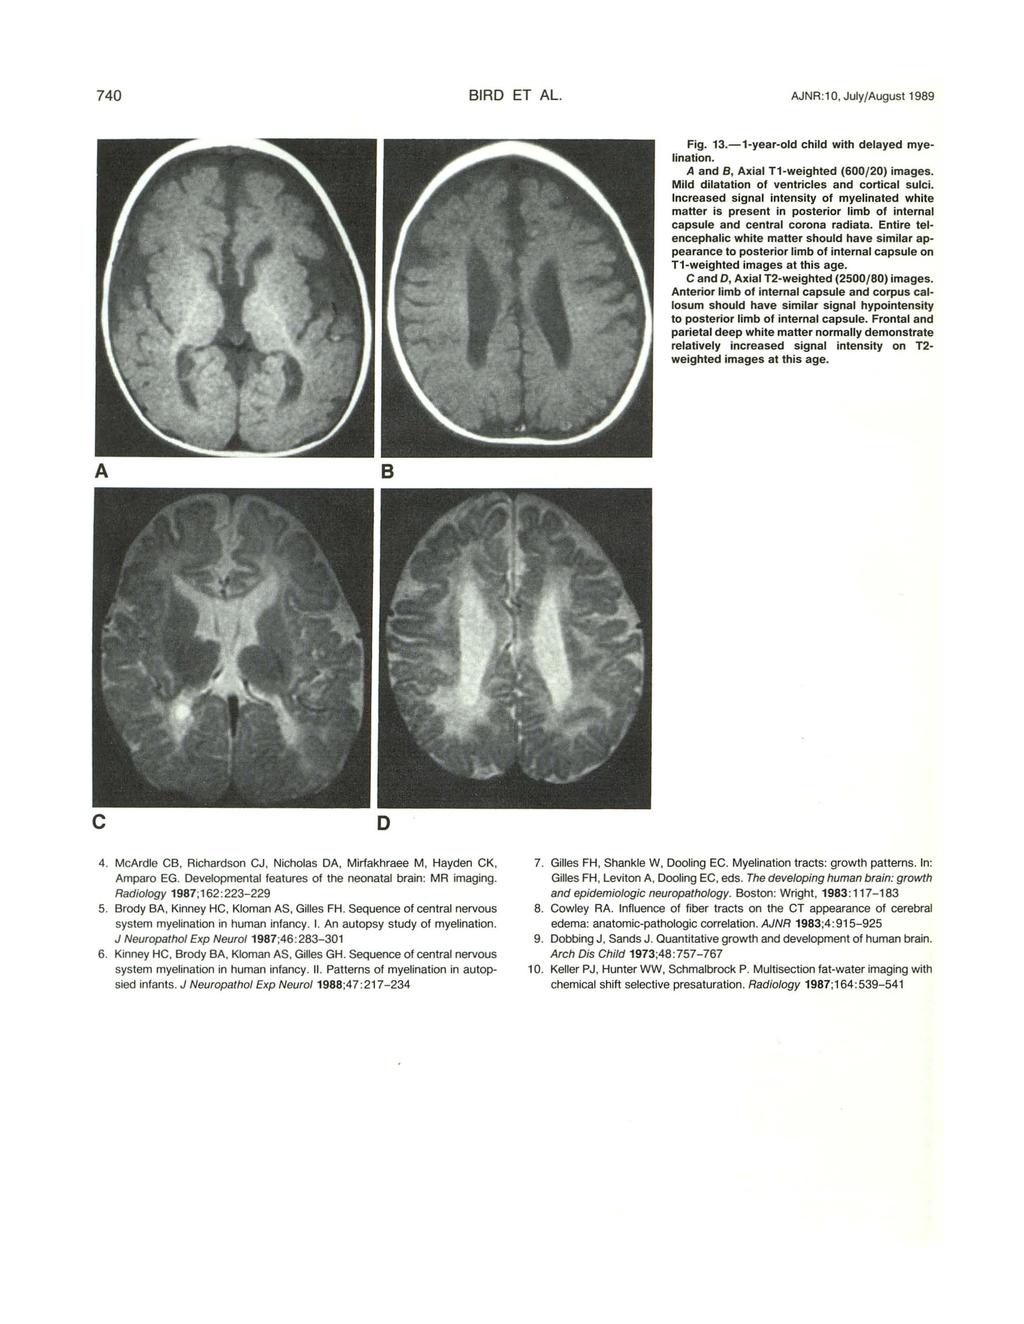 74 IRD ET L. JNR:1, July/ugust 1989 Fig. 13.-1-year-old child with delayed myelination. and 8, xial T1-weighted (6/2) images. Mild dilatation of ventricles and cortical sulci.